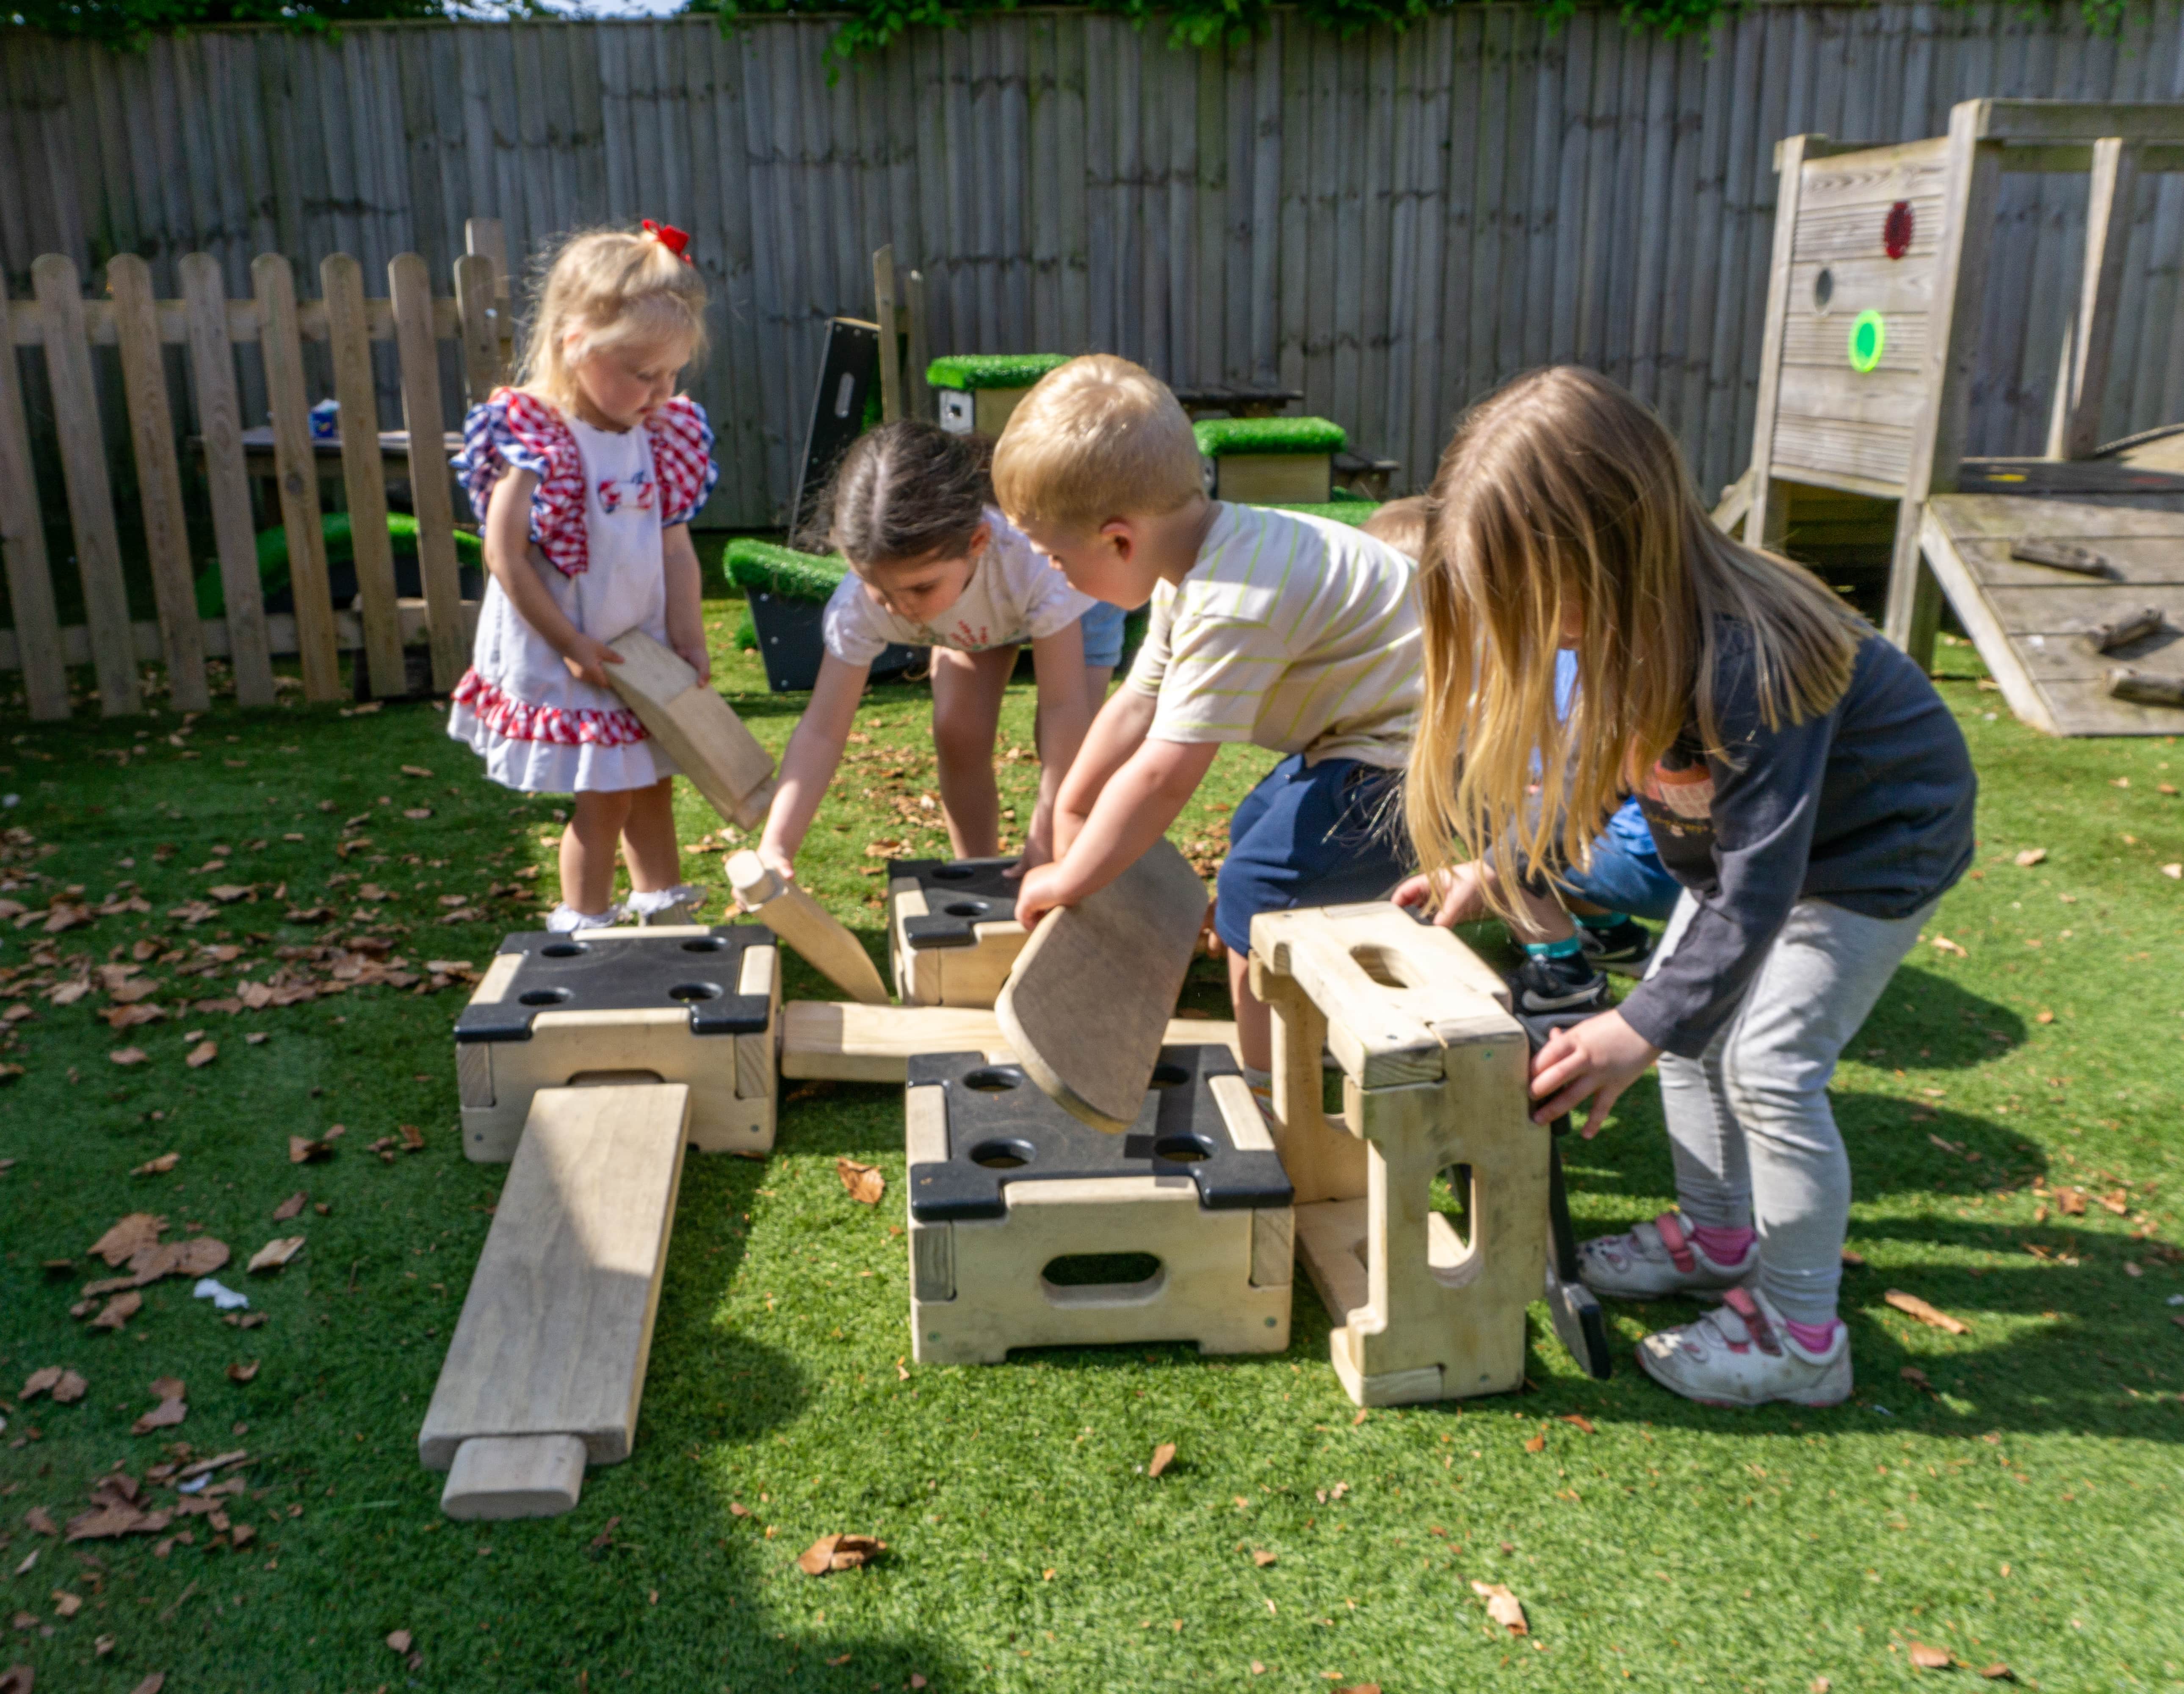 A group of four children are moving the parts of the Play Builder Set that Kindred White Post bought. This Play Builder Set is the Engineer one. The children are all grouped together, picking up different planks and blocks.